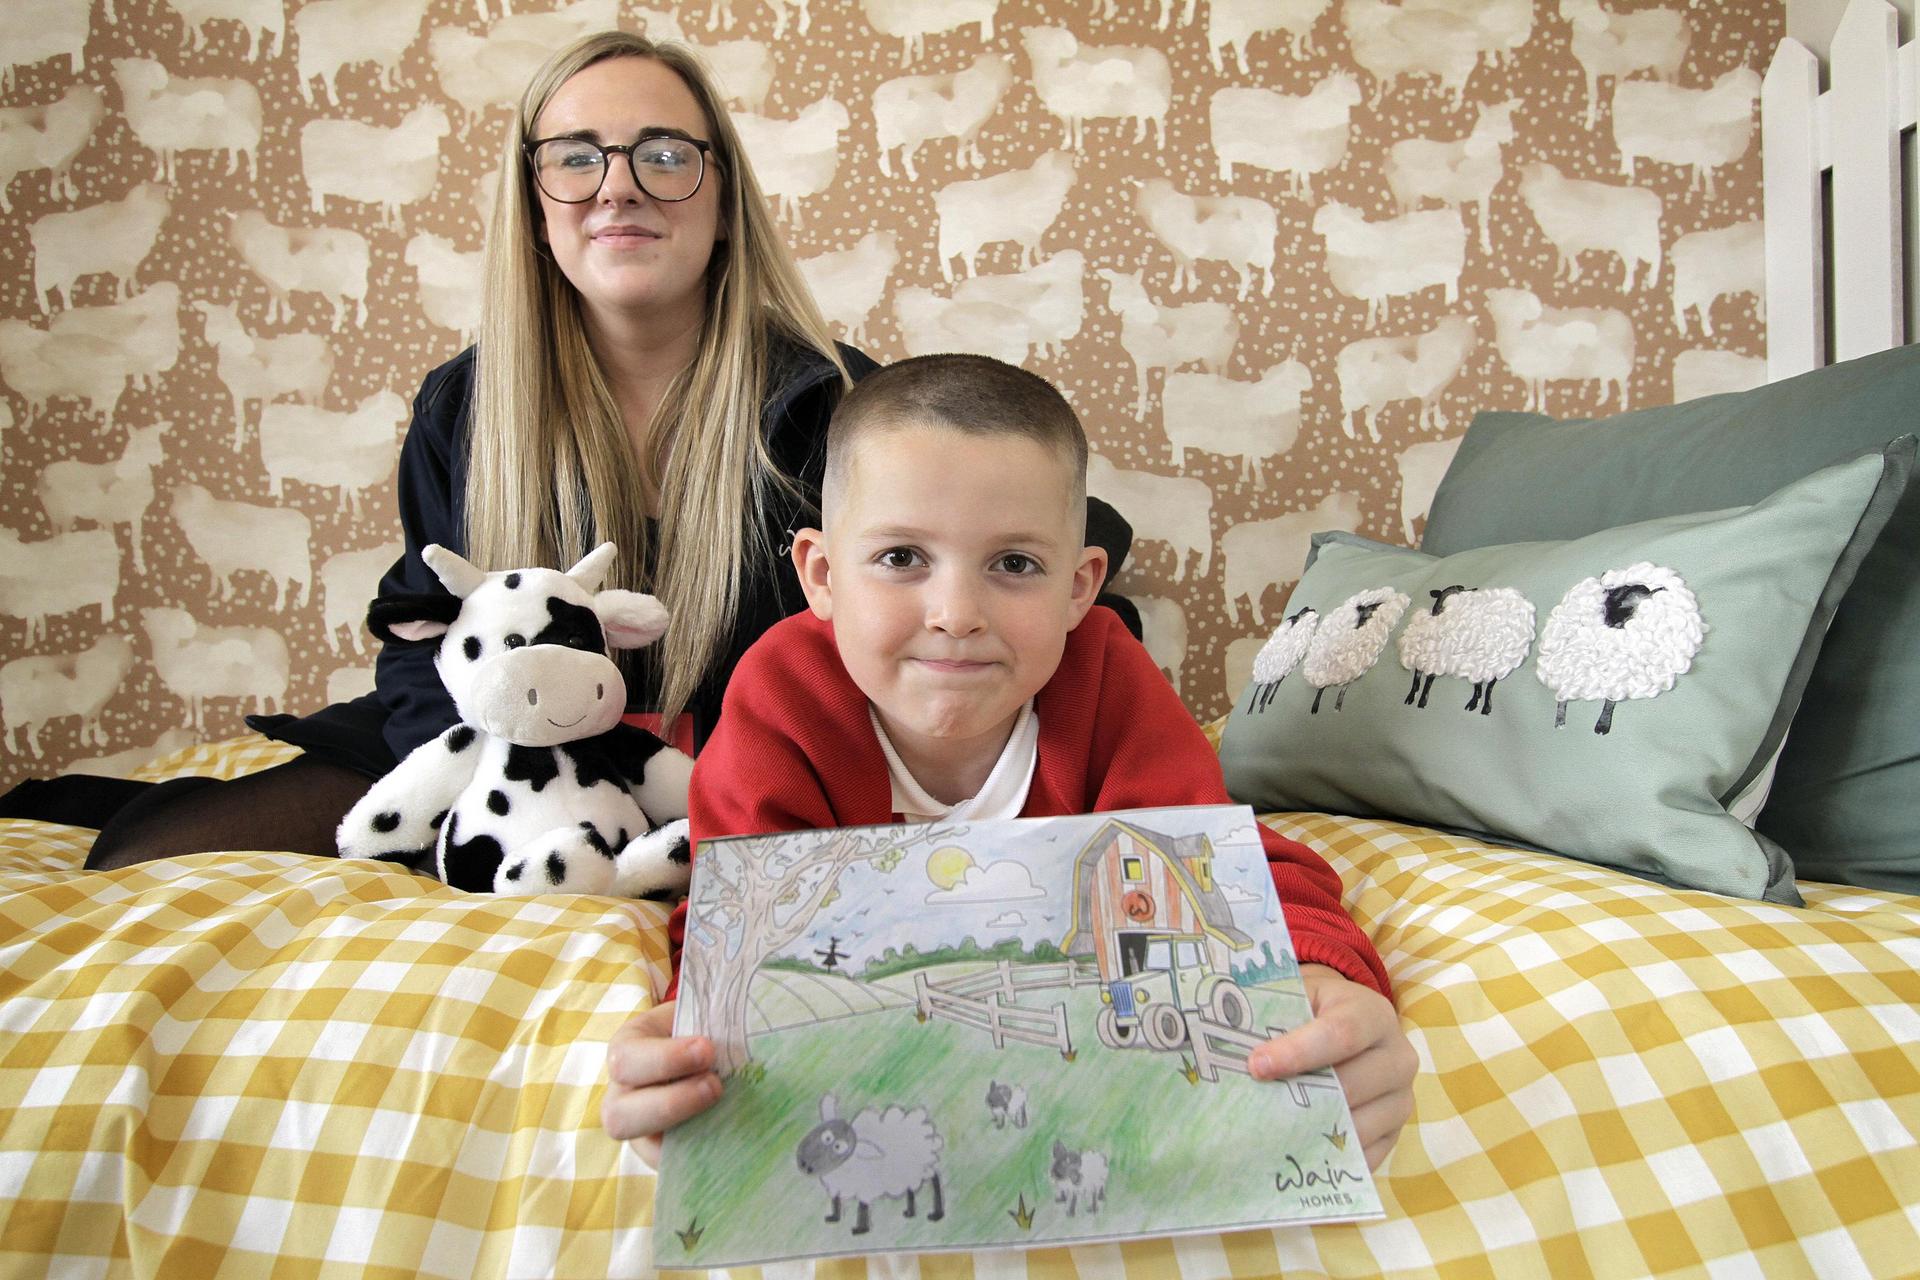 Broughton Pupil’s Sheep and Cheerful Design for Preston Show Home